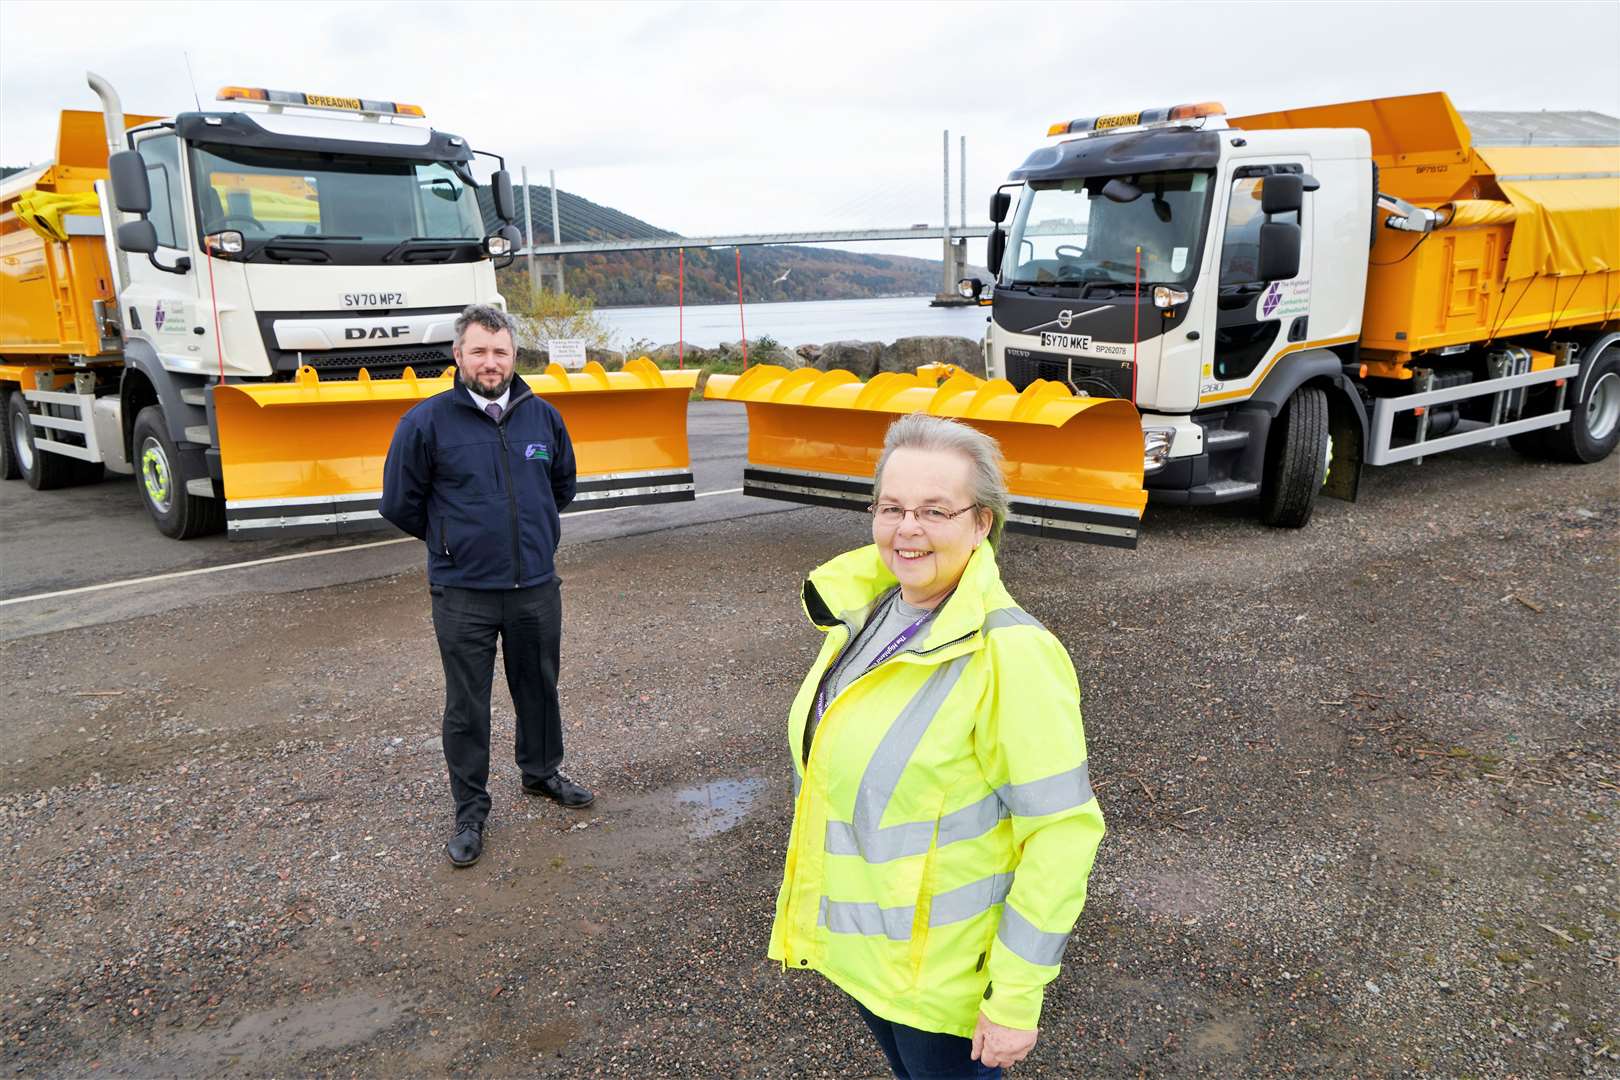 Councillor Trish Robertson and Mike Cooper of Highland Council with some of the new gritters purchased last year.